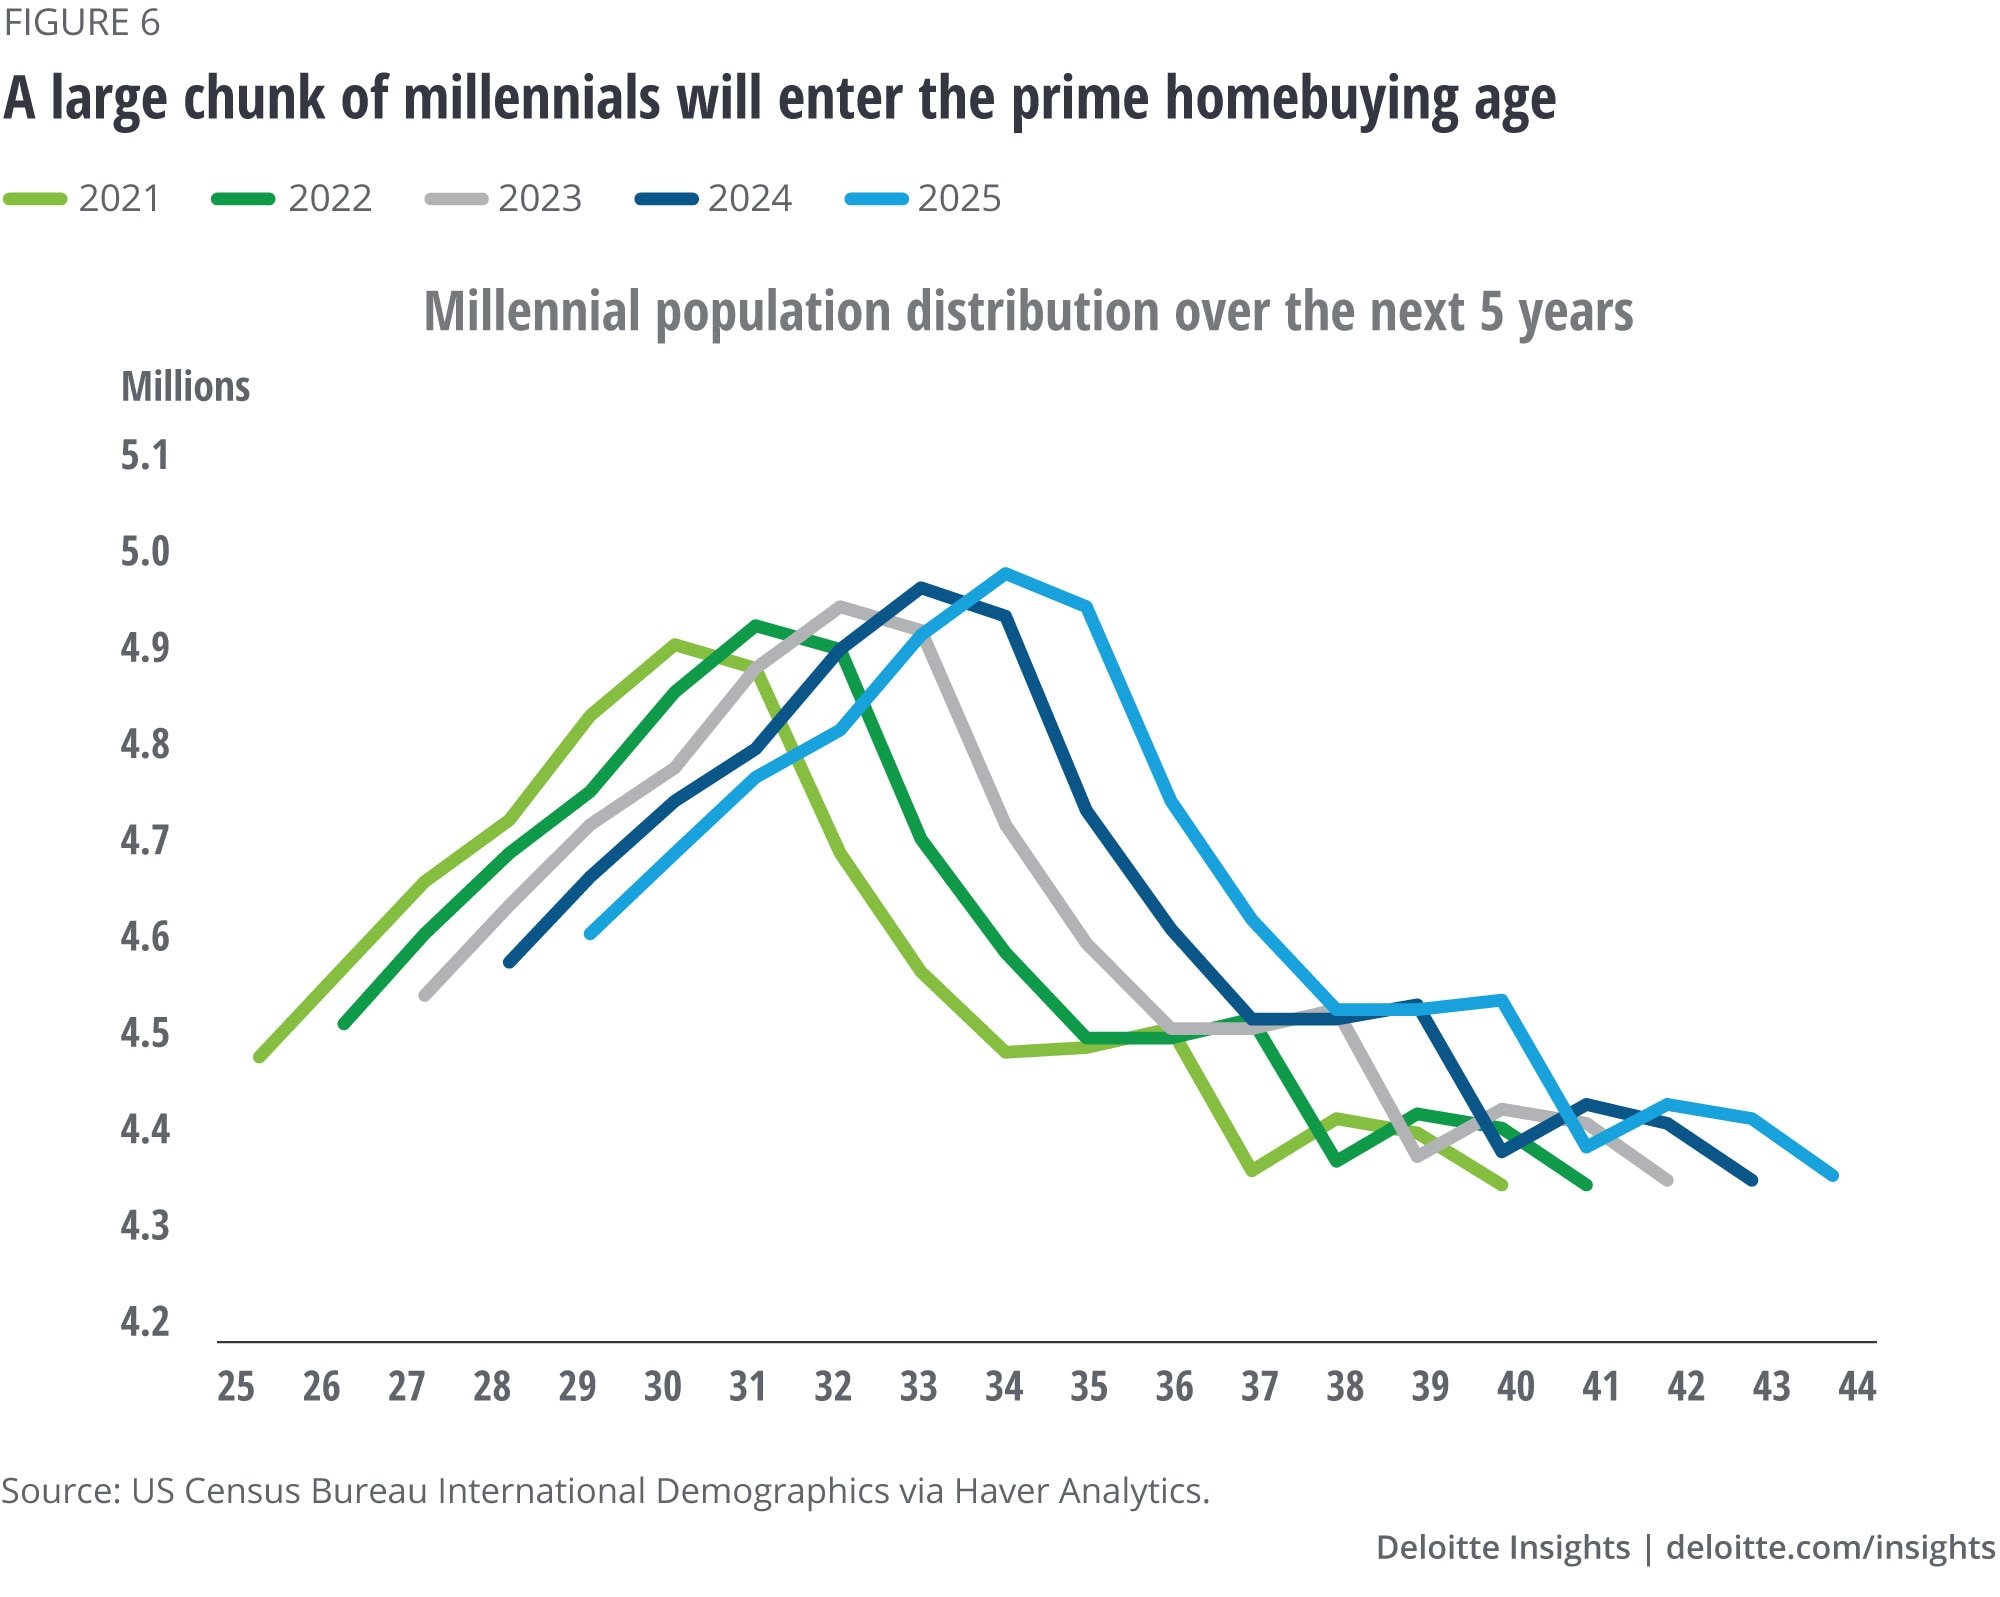 A large chunk of millennials will enter the prime homebuying age